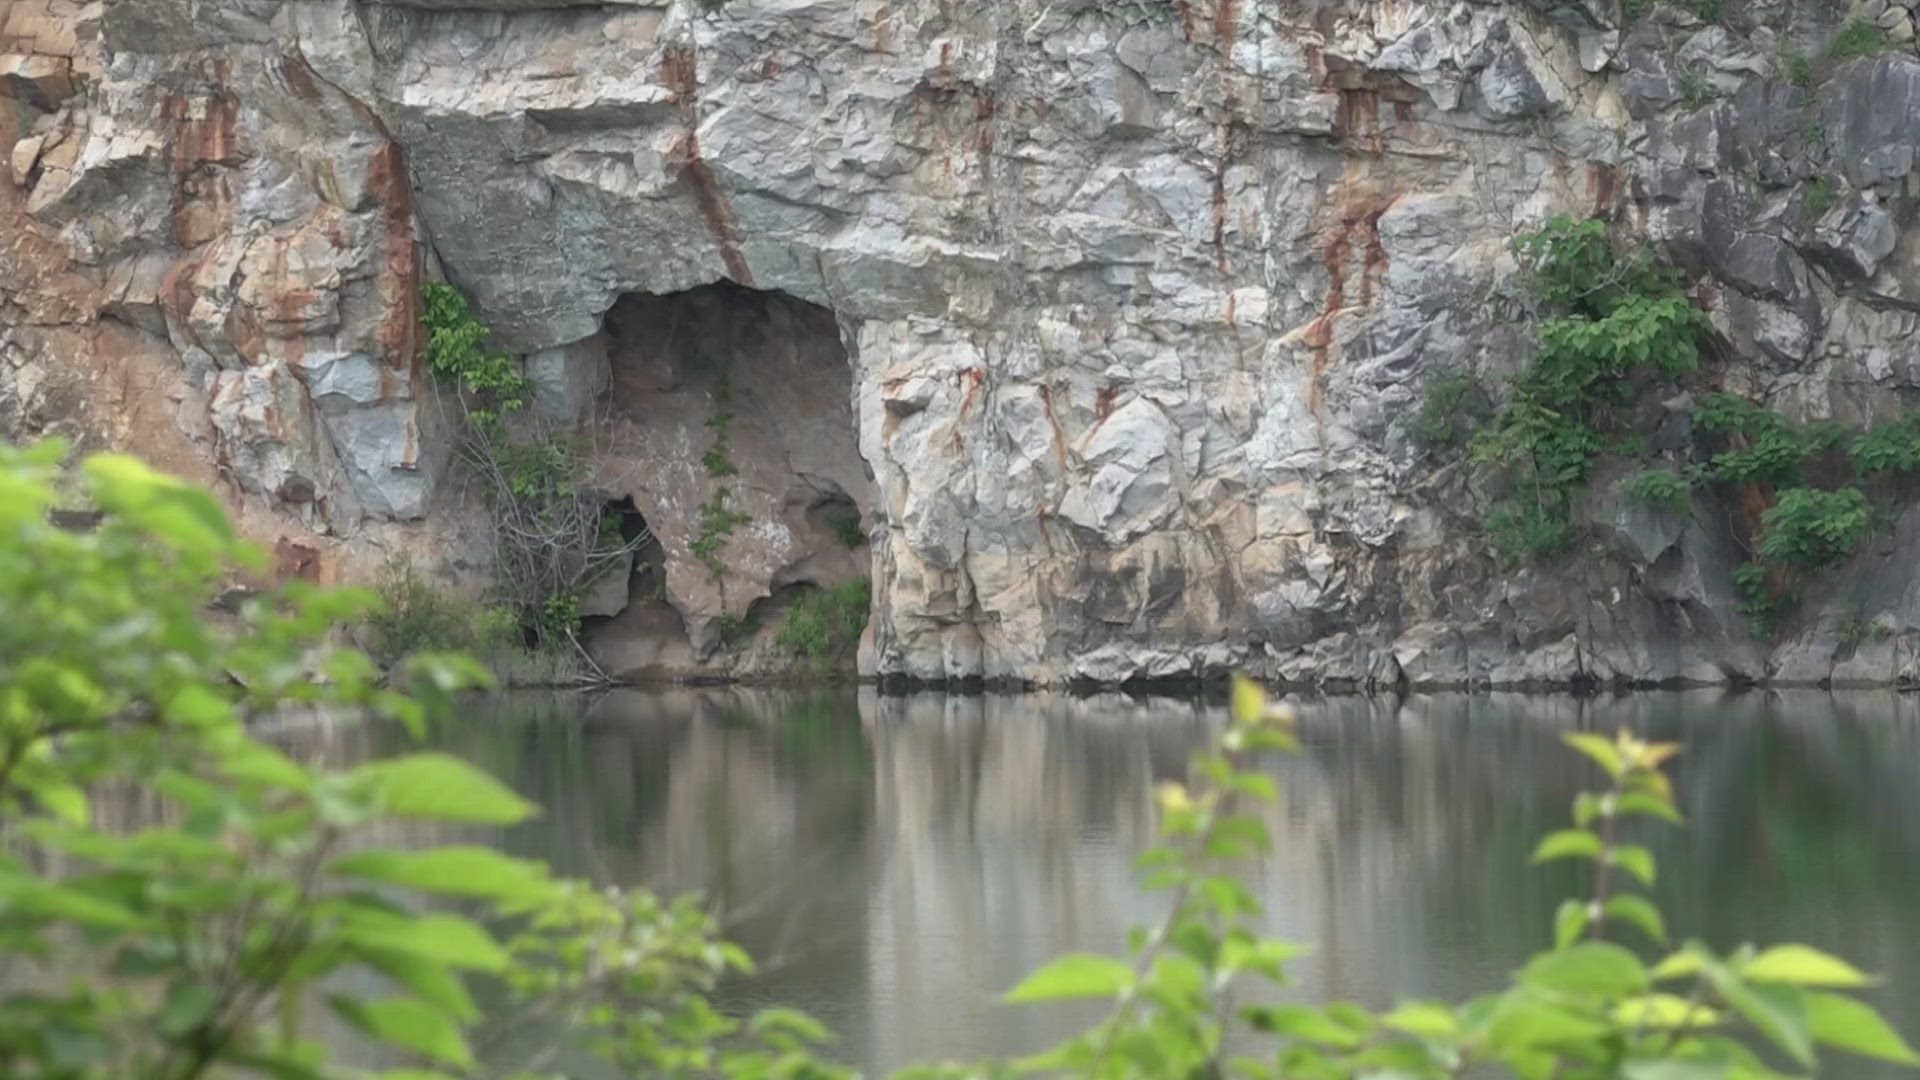 “I know everyone wants to swim, and we’re all ready for a fun summer at Mead’s Quarry, but safety comes first," said the leader of the nature center.